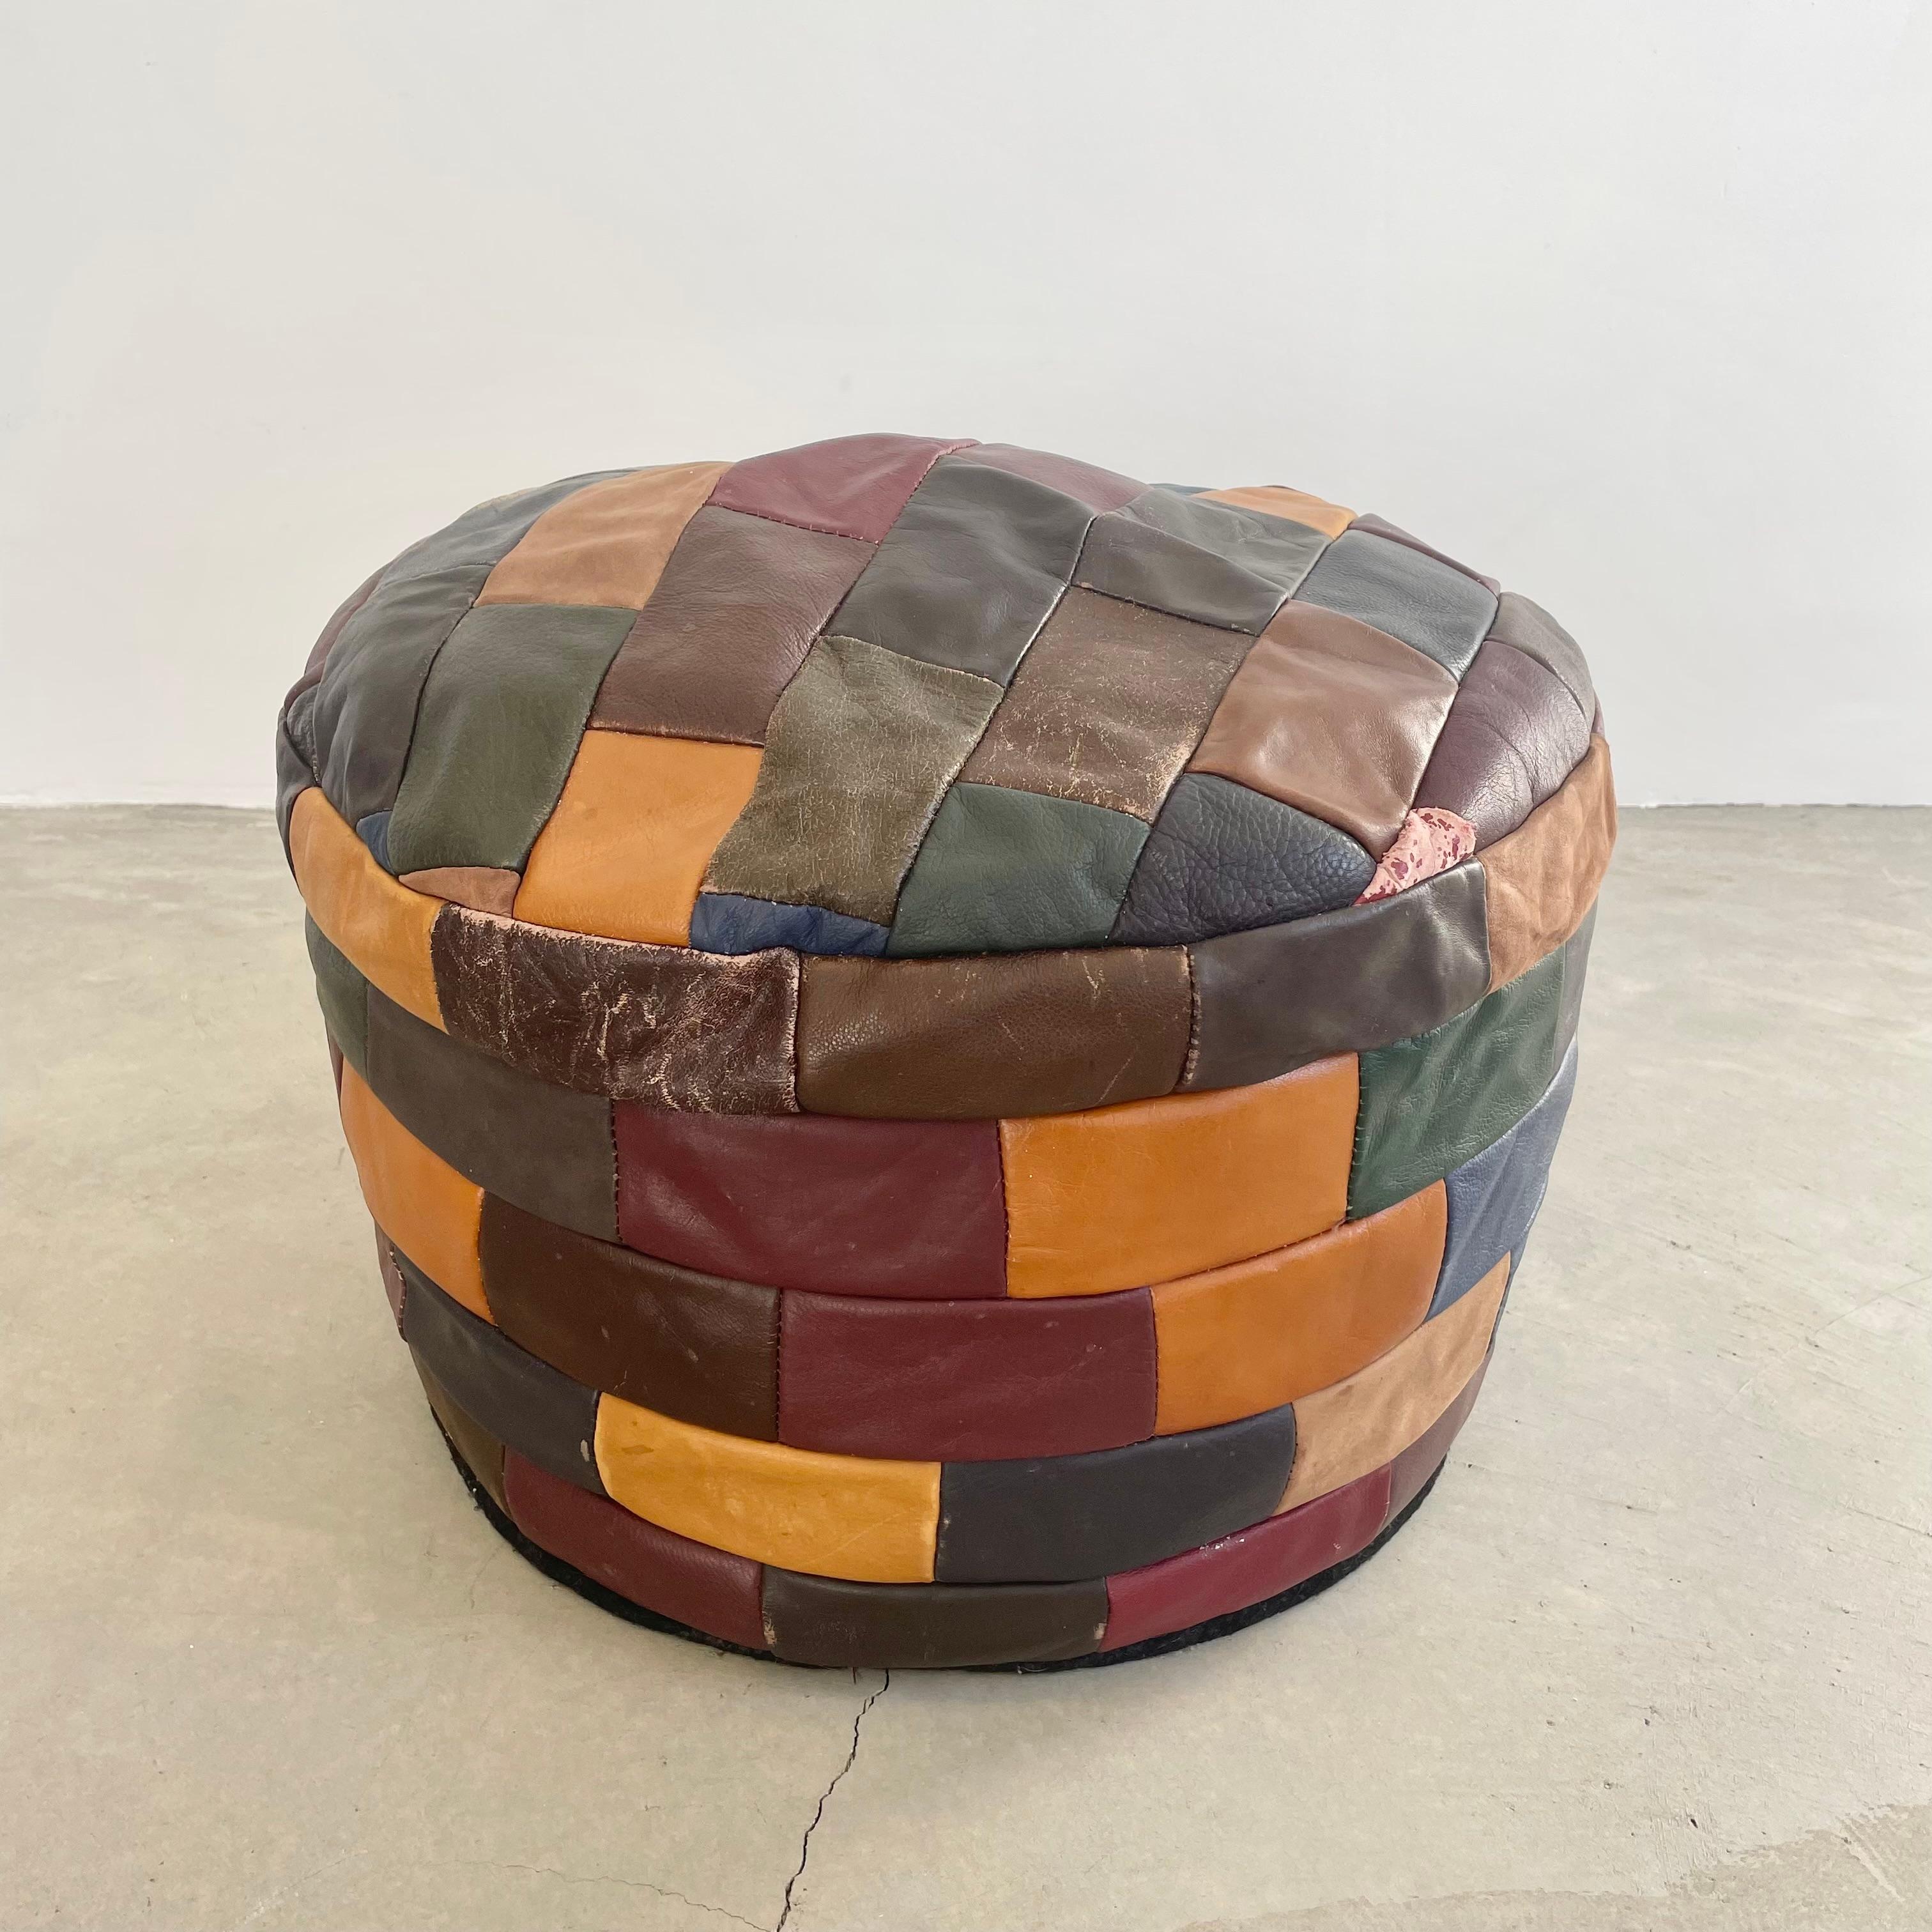 Gorgeous multicolored leather pouf/ottoman by Swiss designer De Sede with square patchwork. Handmade with wonderful faded patina of varying degrees of red, green, brown, tan, blue and purple. Design and colors are reminiscent of Northern African